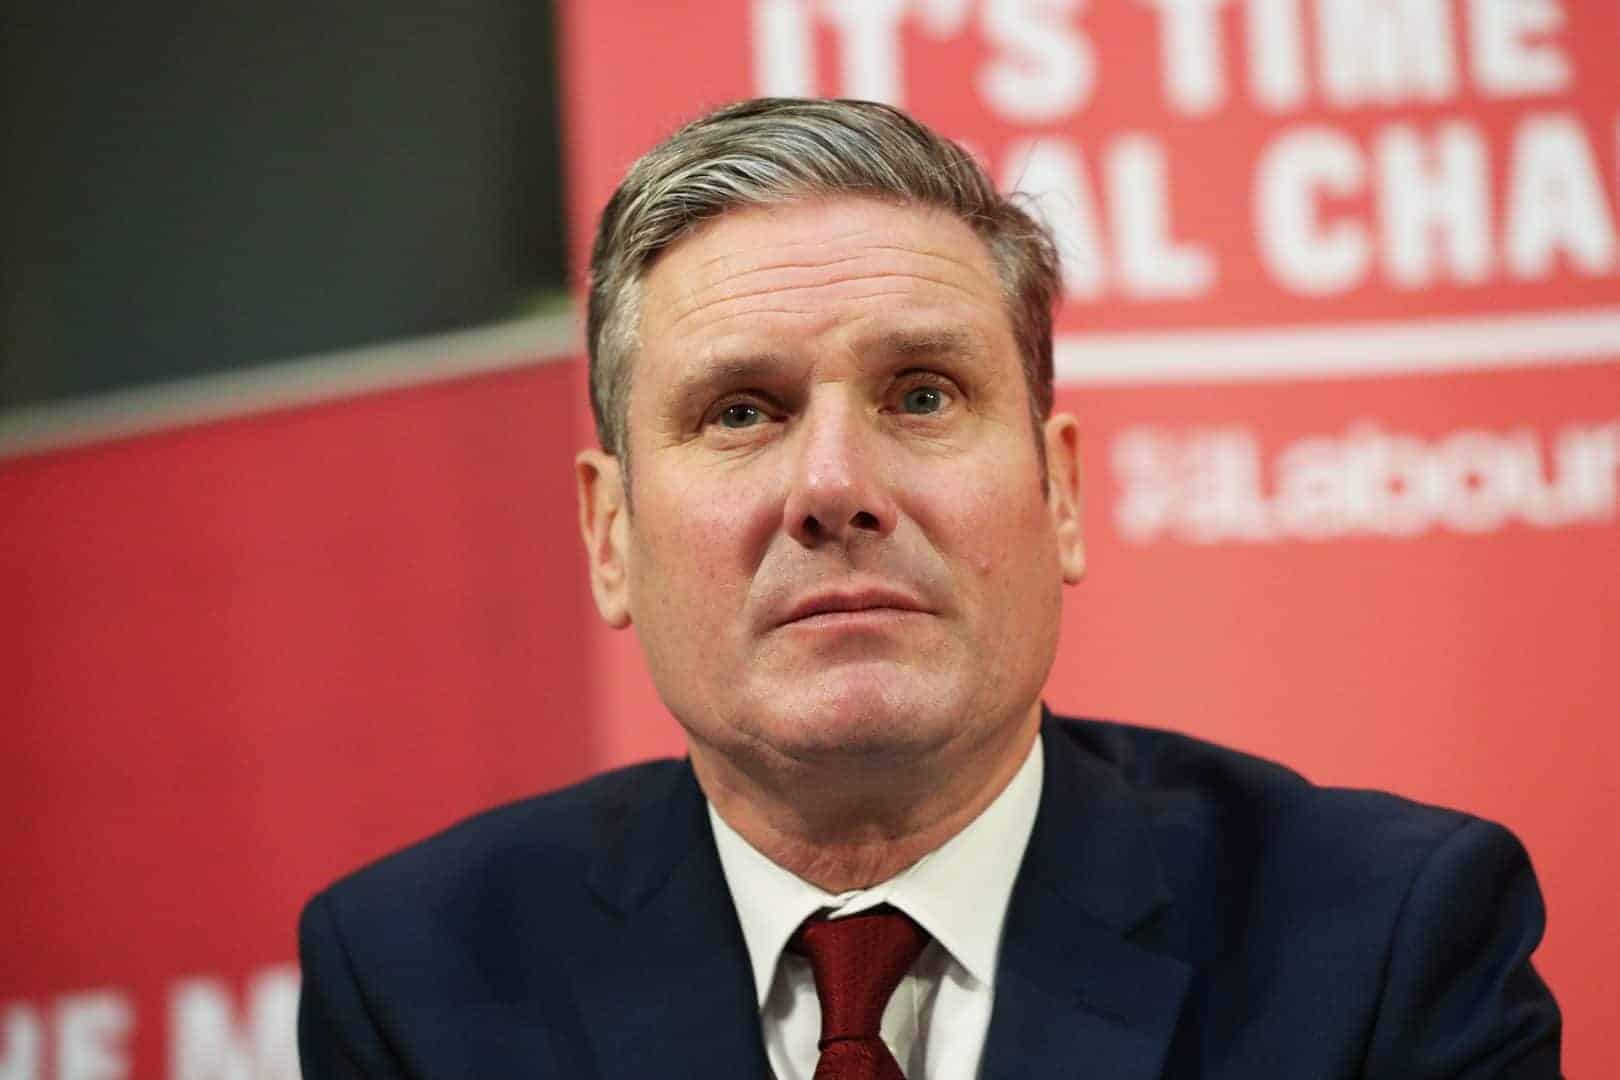 Keir Starmer clear favourite as candidates prepare for leadership battle